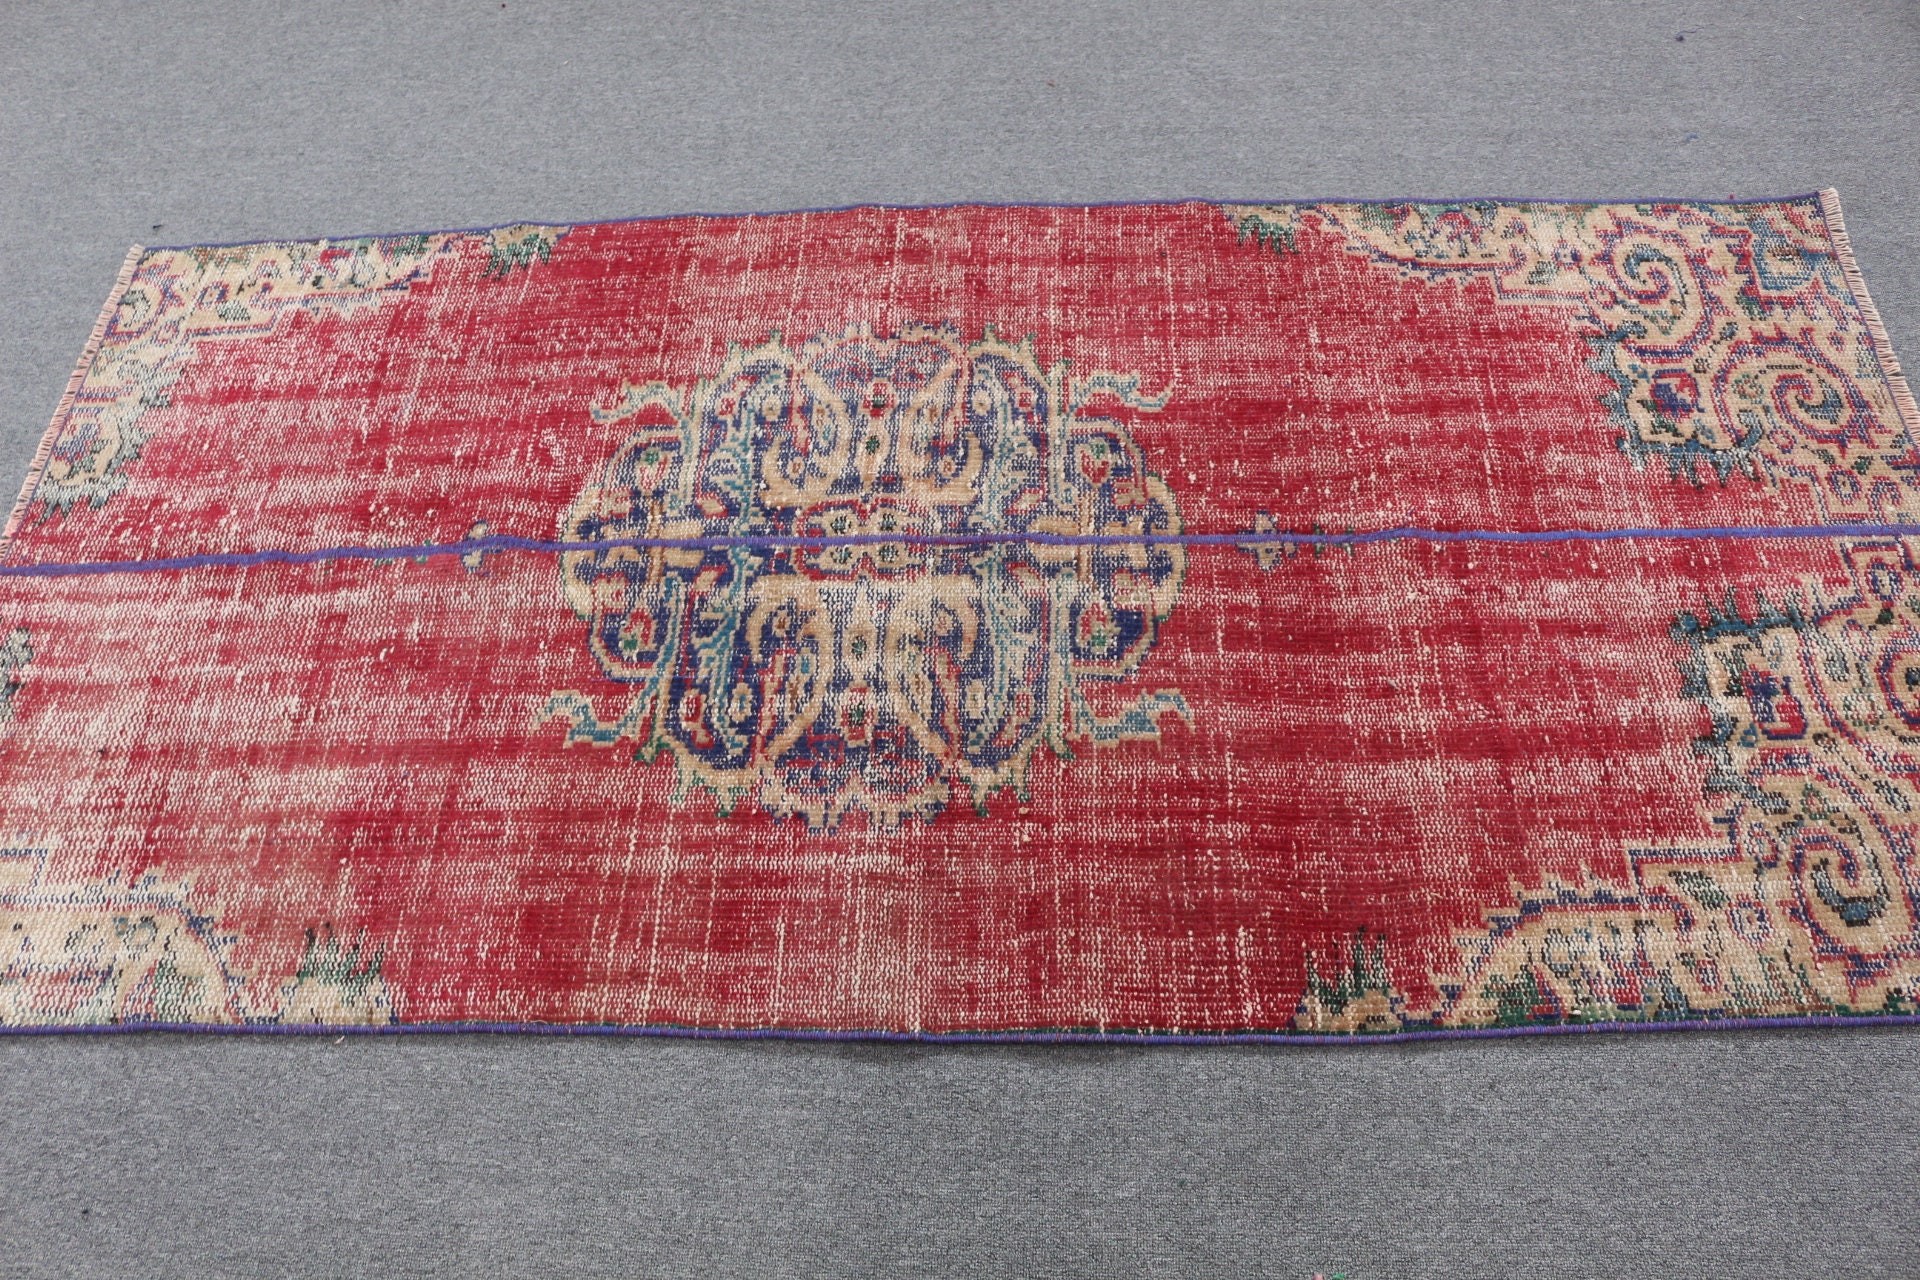 Vintage Rug, Moroccan Rug, Turkish Rugs, 3.4x6.7 ft Accent Rug, Entry Rug, Red Cool Rug, Kitchen Rugs, Old Rug, Cool Rugs, Rugs for Bedroom